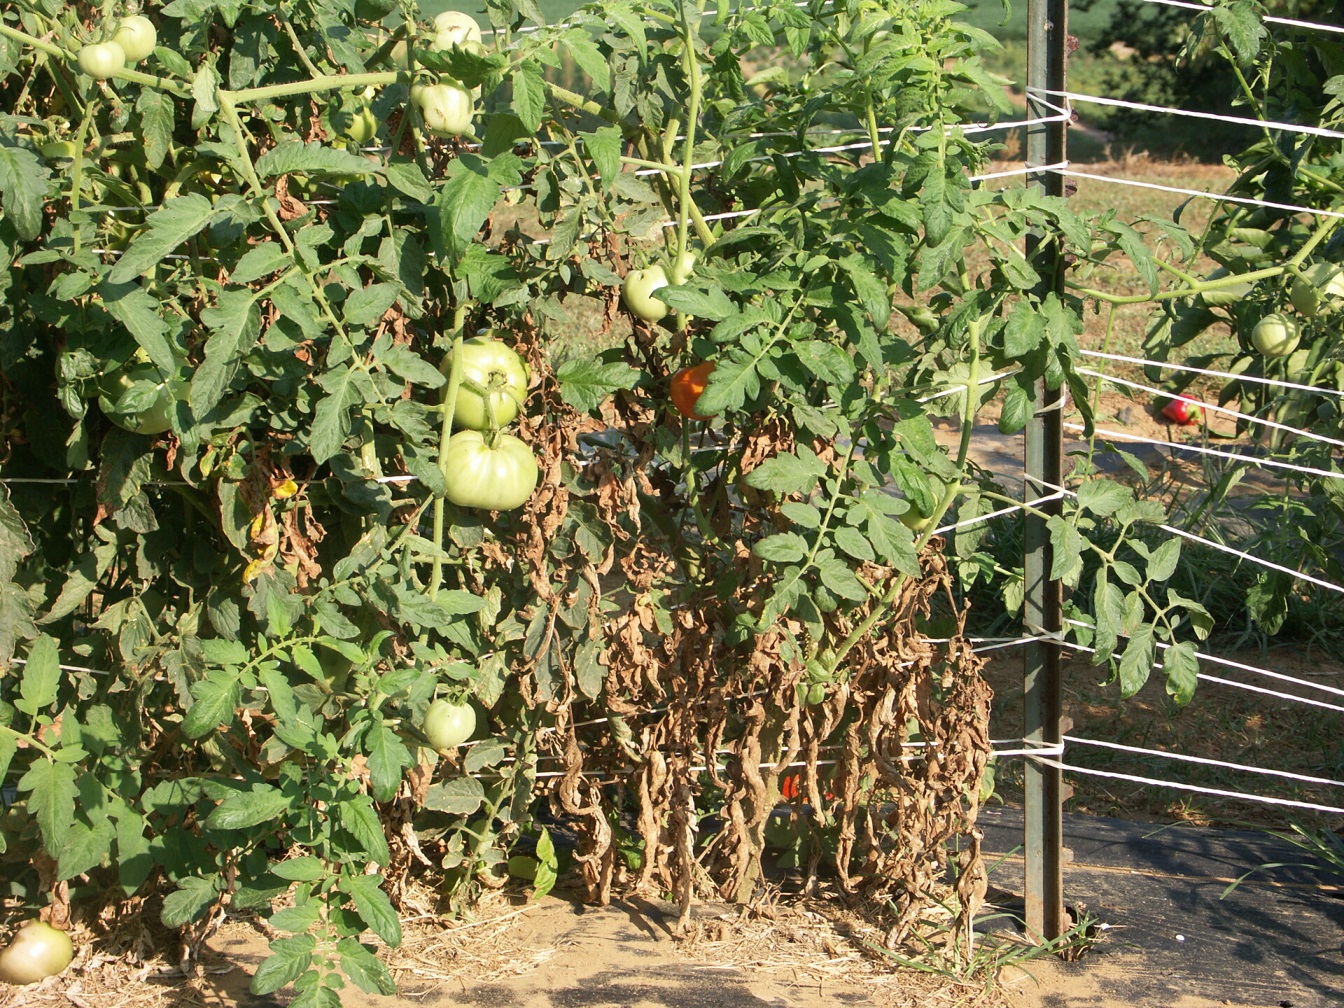 Older leaves are more susceptible to the early blight fungus. Therefore, tomato plants may appear to be dying from the ground up.